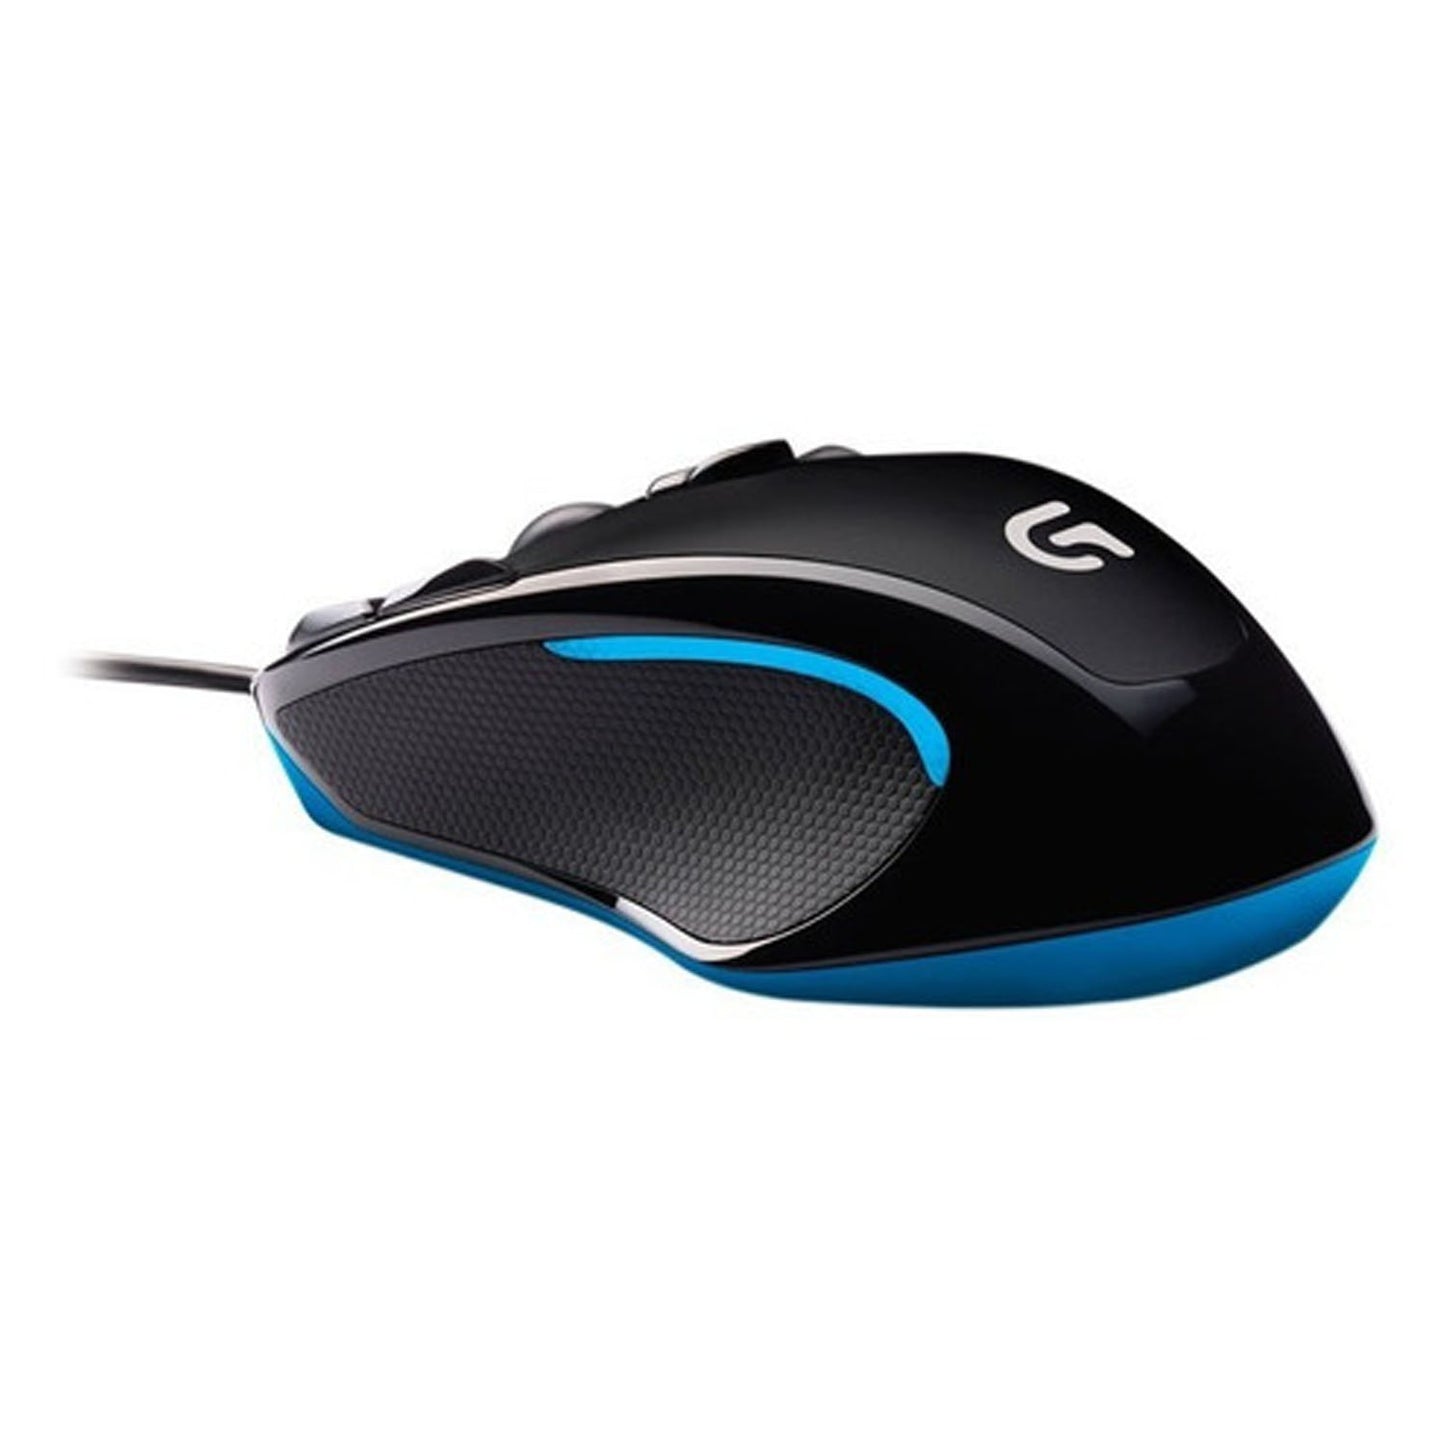 Mouse Logitech G300s -pc-ps4-xbox One-